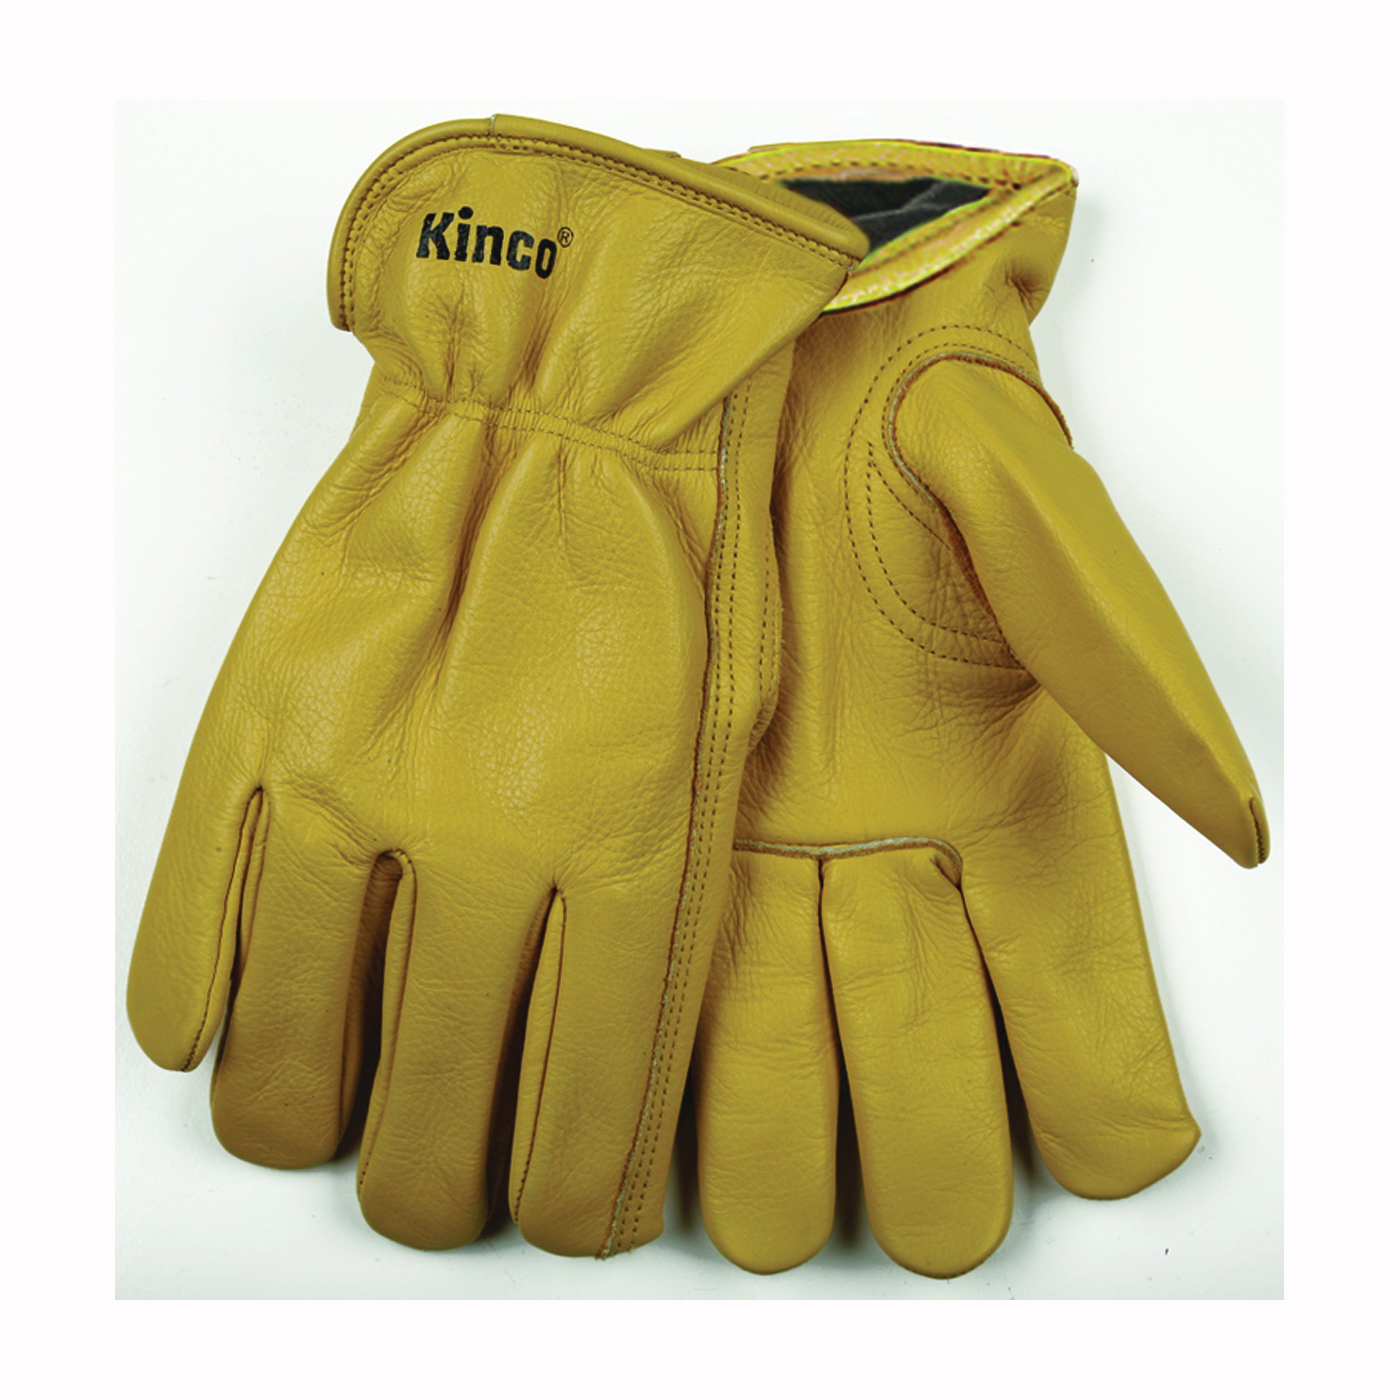 98RL-L Driver Gloves, Men's, L, 10-1/2 in L, Keystone Thumb, Easy-On Cuff, Cowhide Leather, Gold